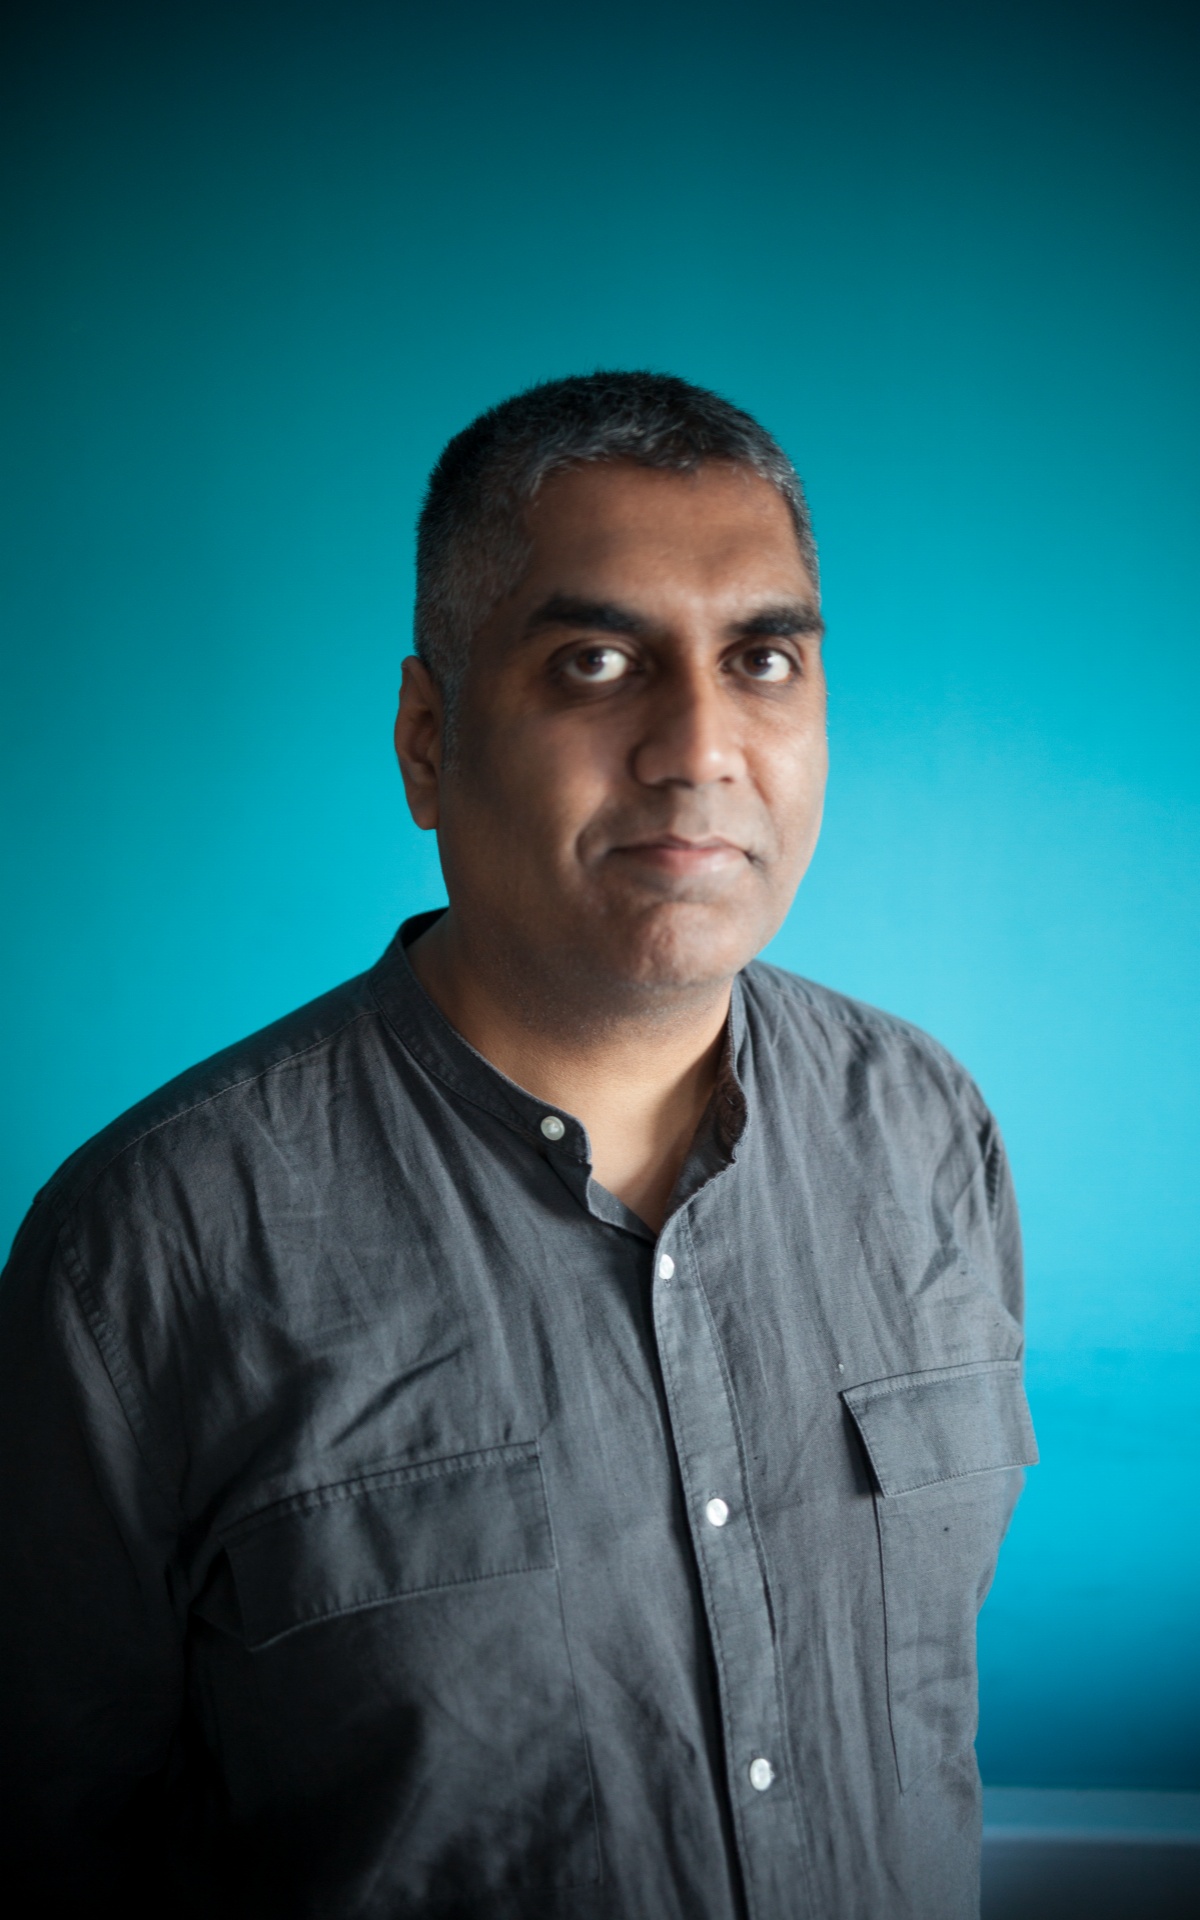 Ashok stands facing the camera against a turquoise background. He has short hair and wears a grey shirt. . He looks directly at the camera.